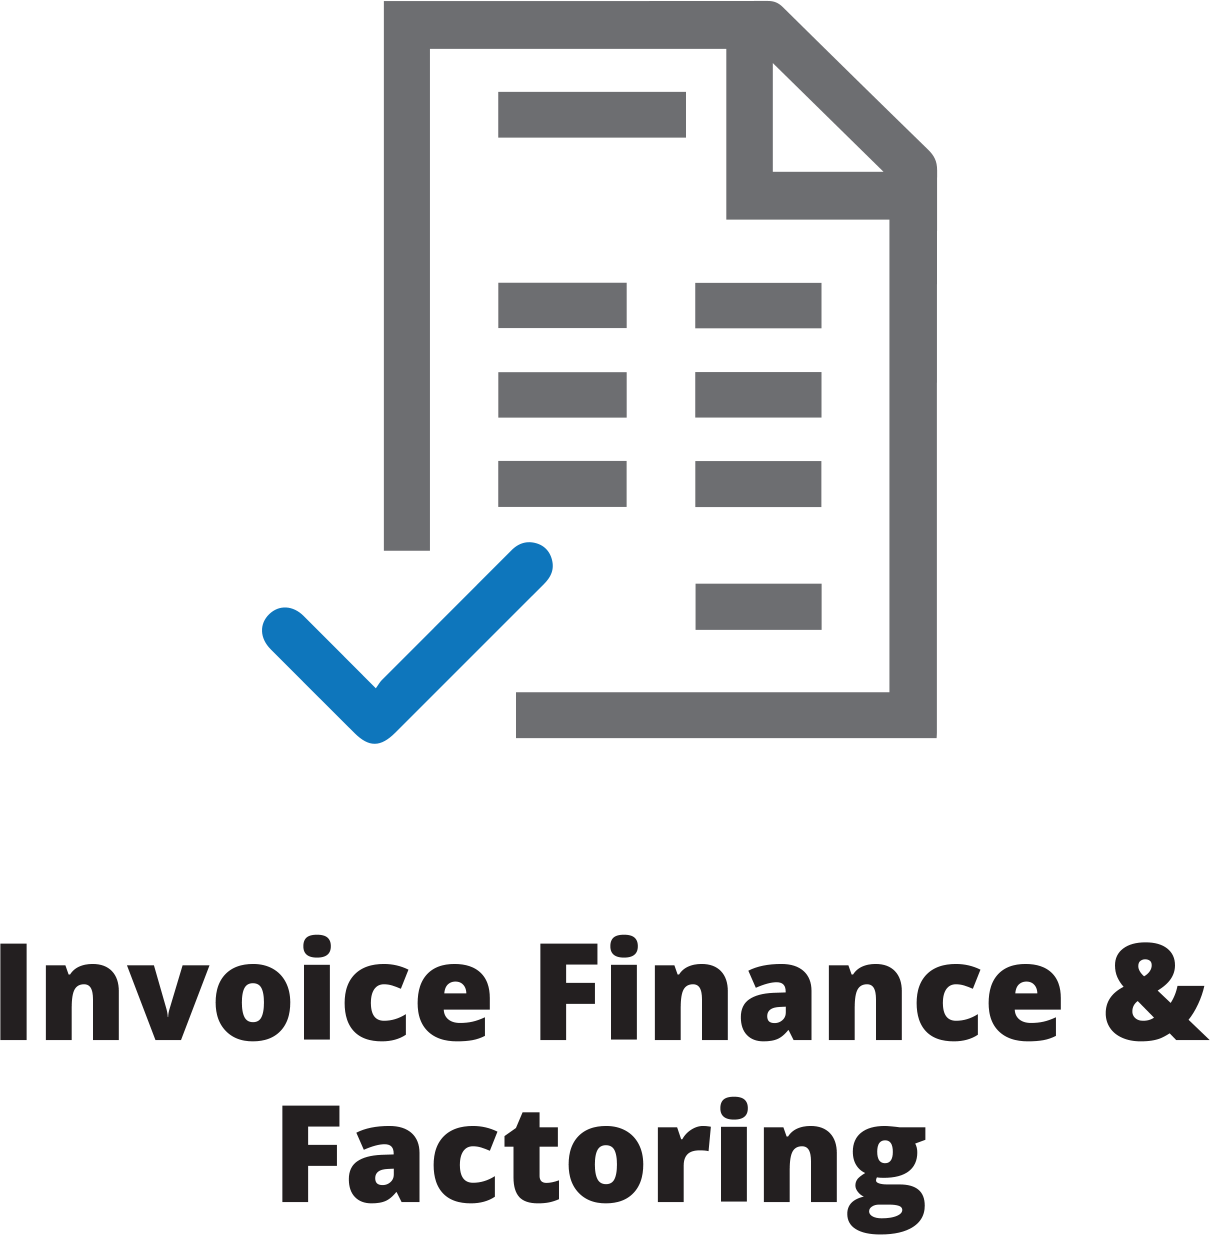 Invoice finance and factoring